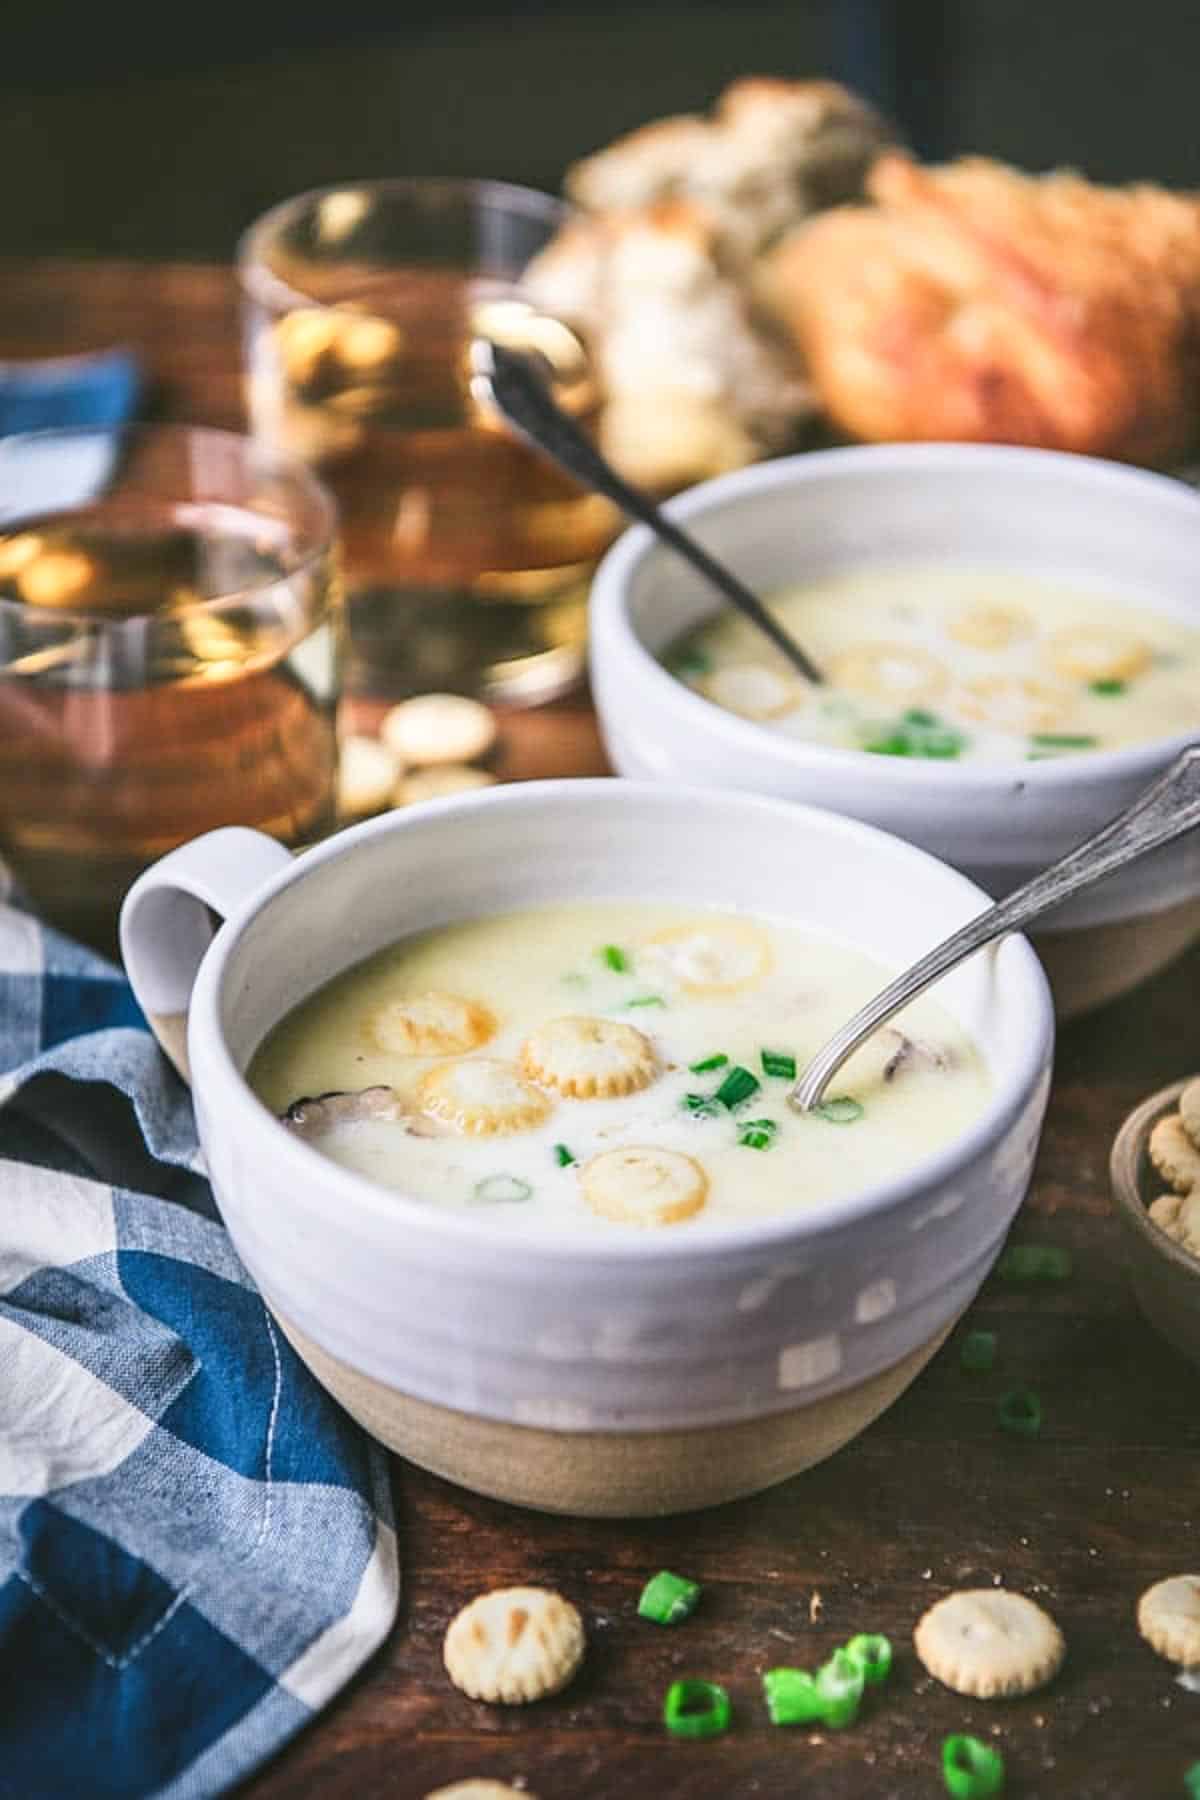 Oyster Stew with Coconut Milk